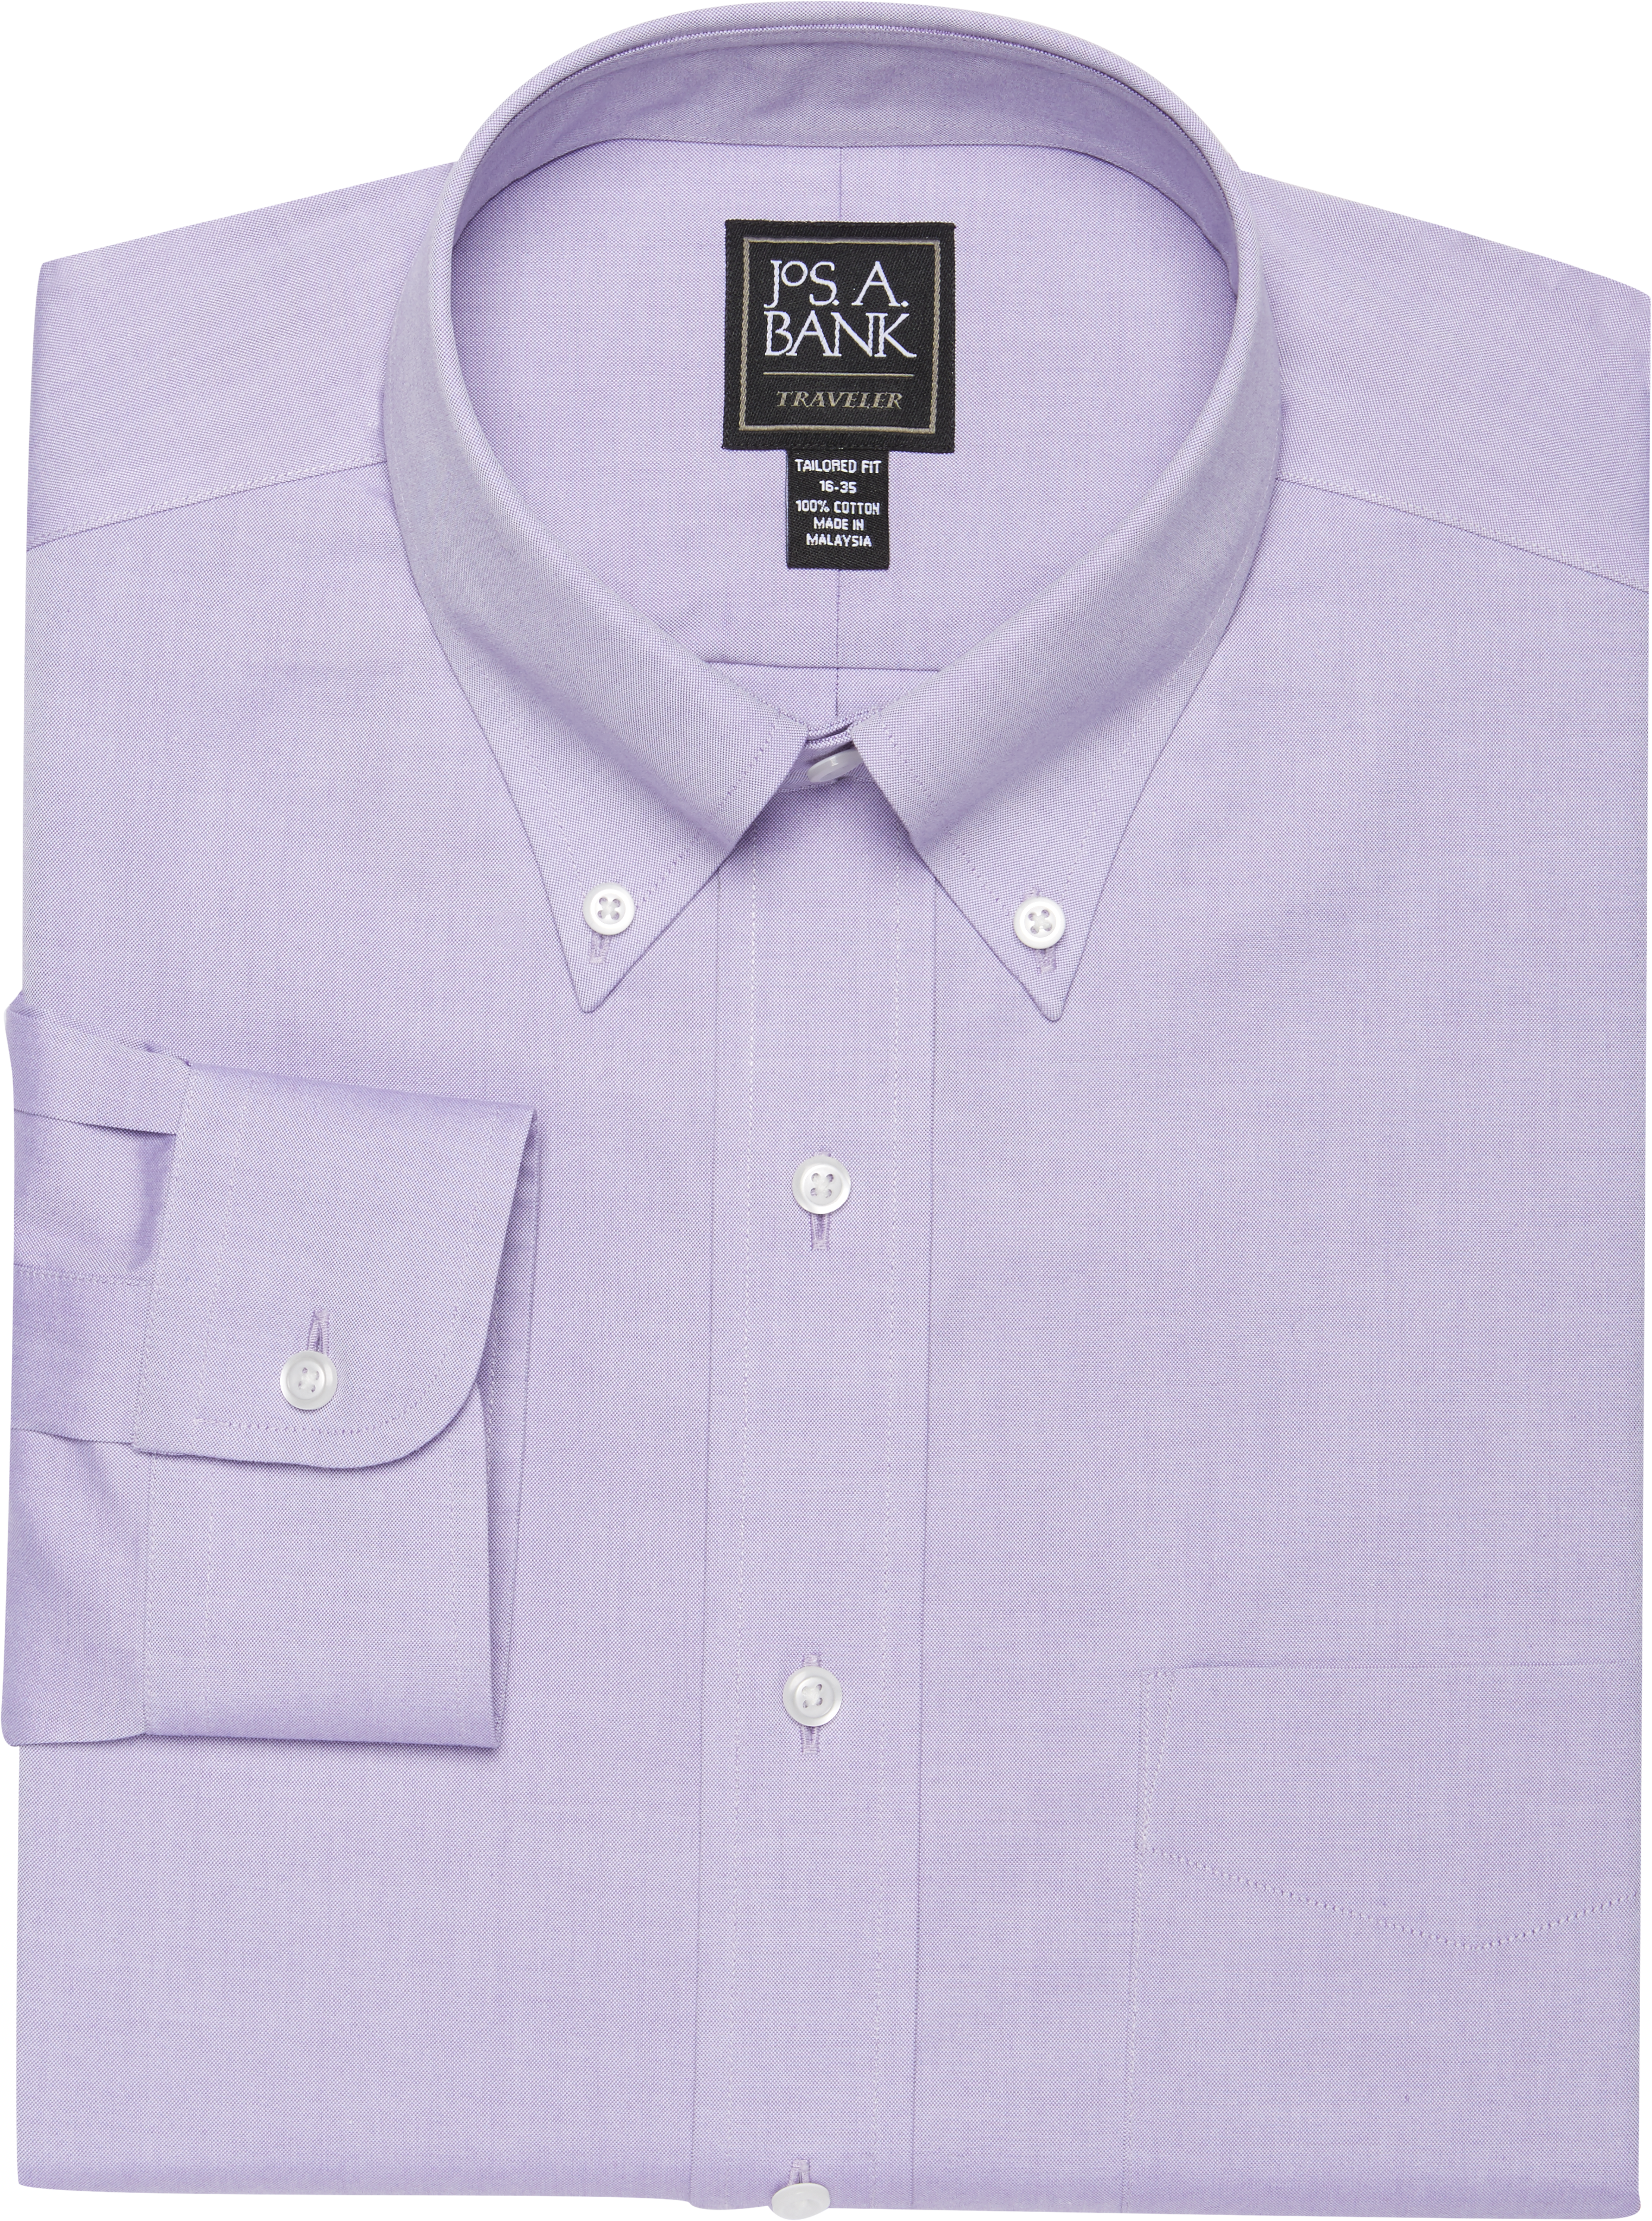 Image of JoS. A. Bank Men's Traveler Collection Tailored Fit Button-Down Collar Dress Shirt, New Purple, 16 1/2x37 Tall